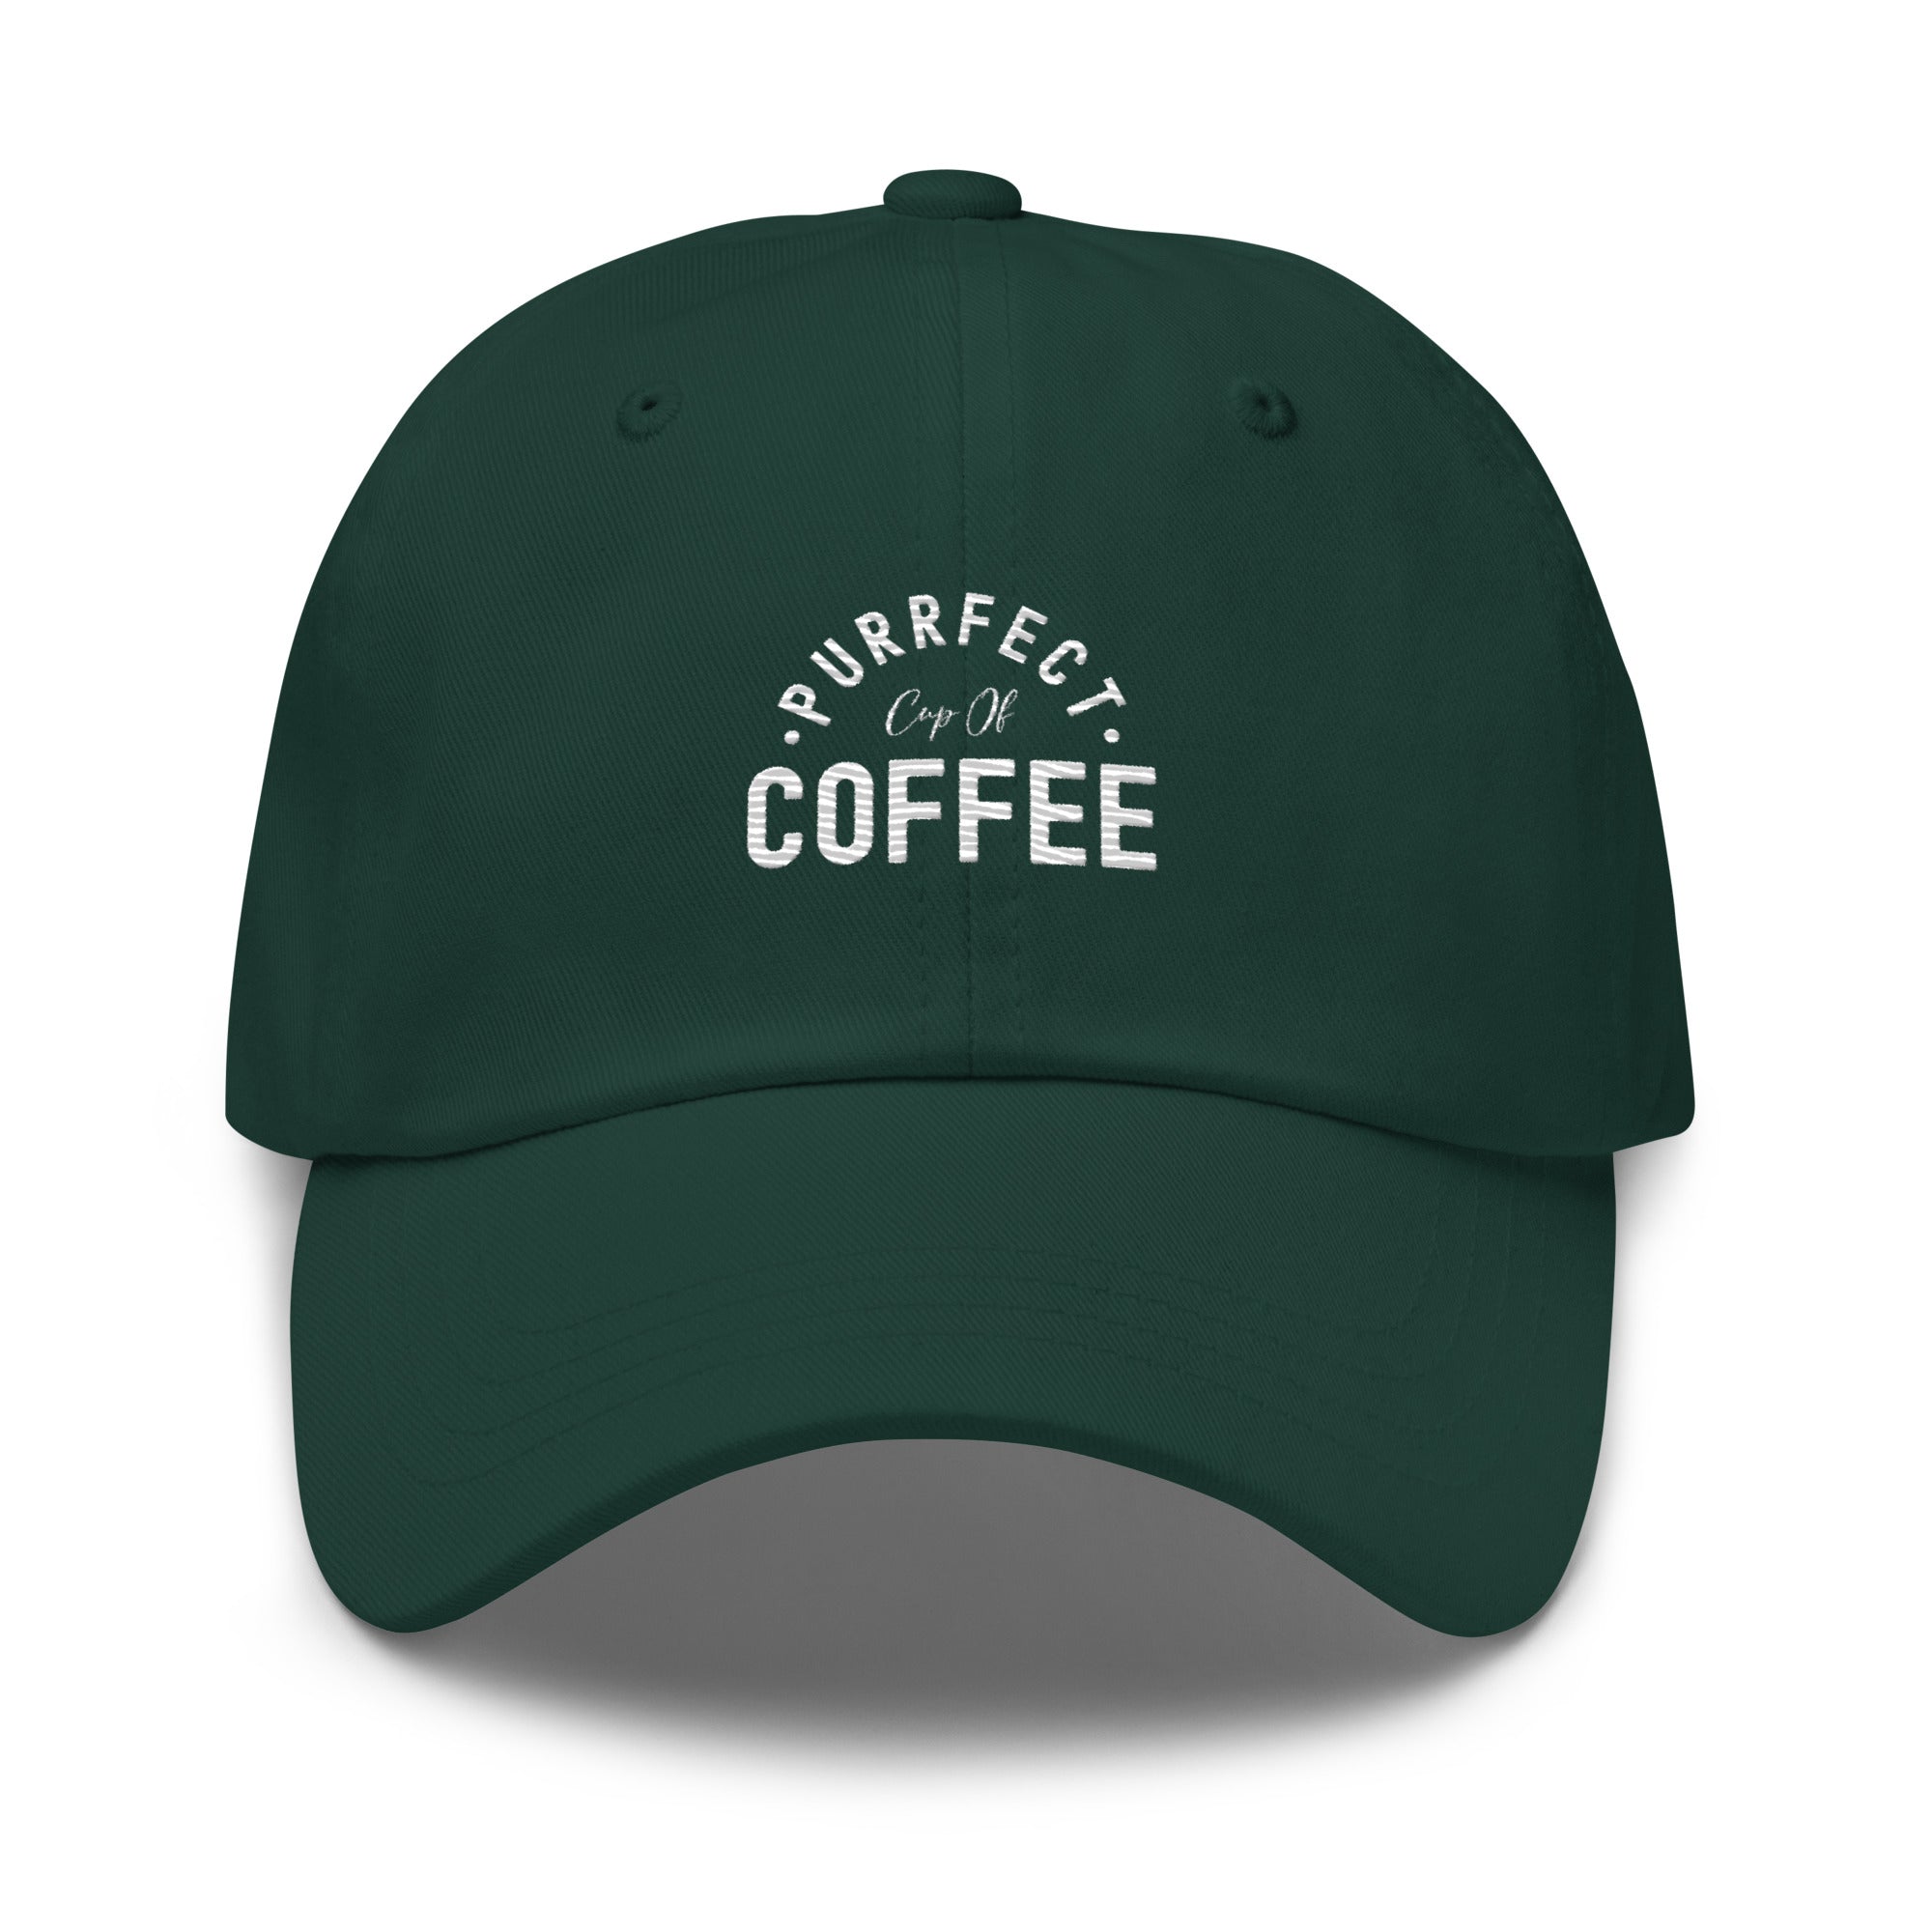 Hat | Purrfect cup of coffee